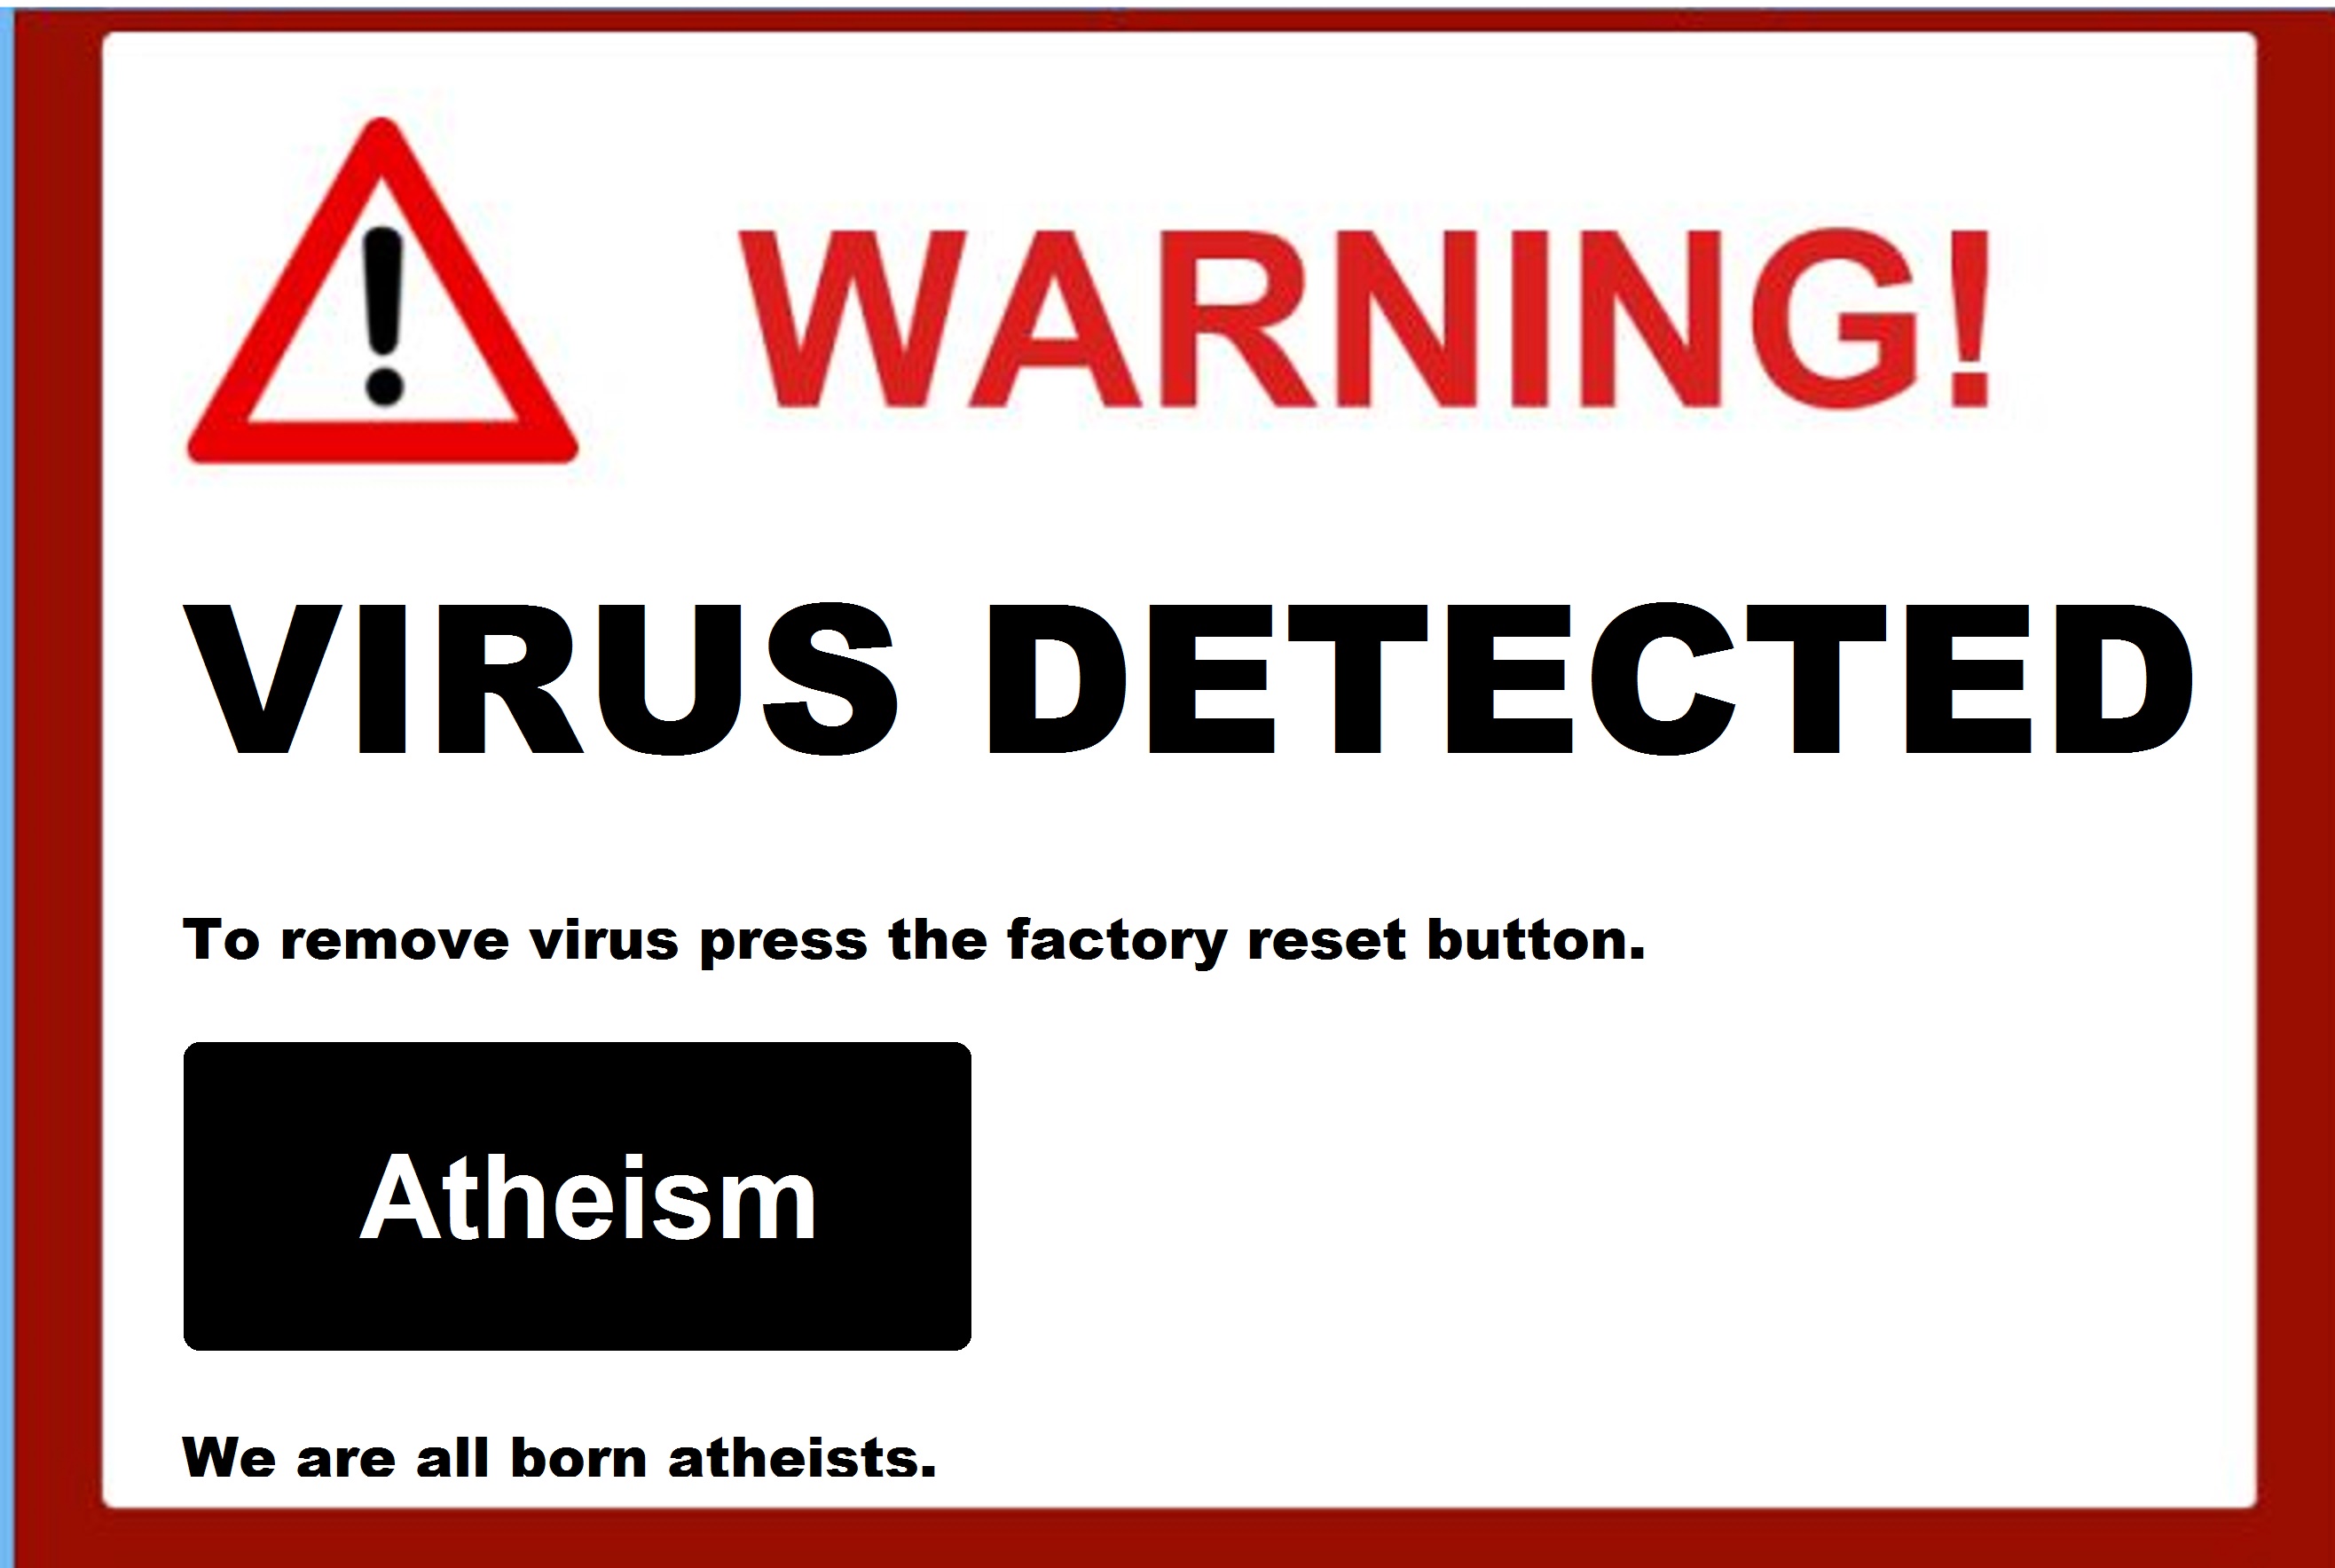 To remove virus press the factory reset button. ATHEIM We are all born atheists. 